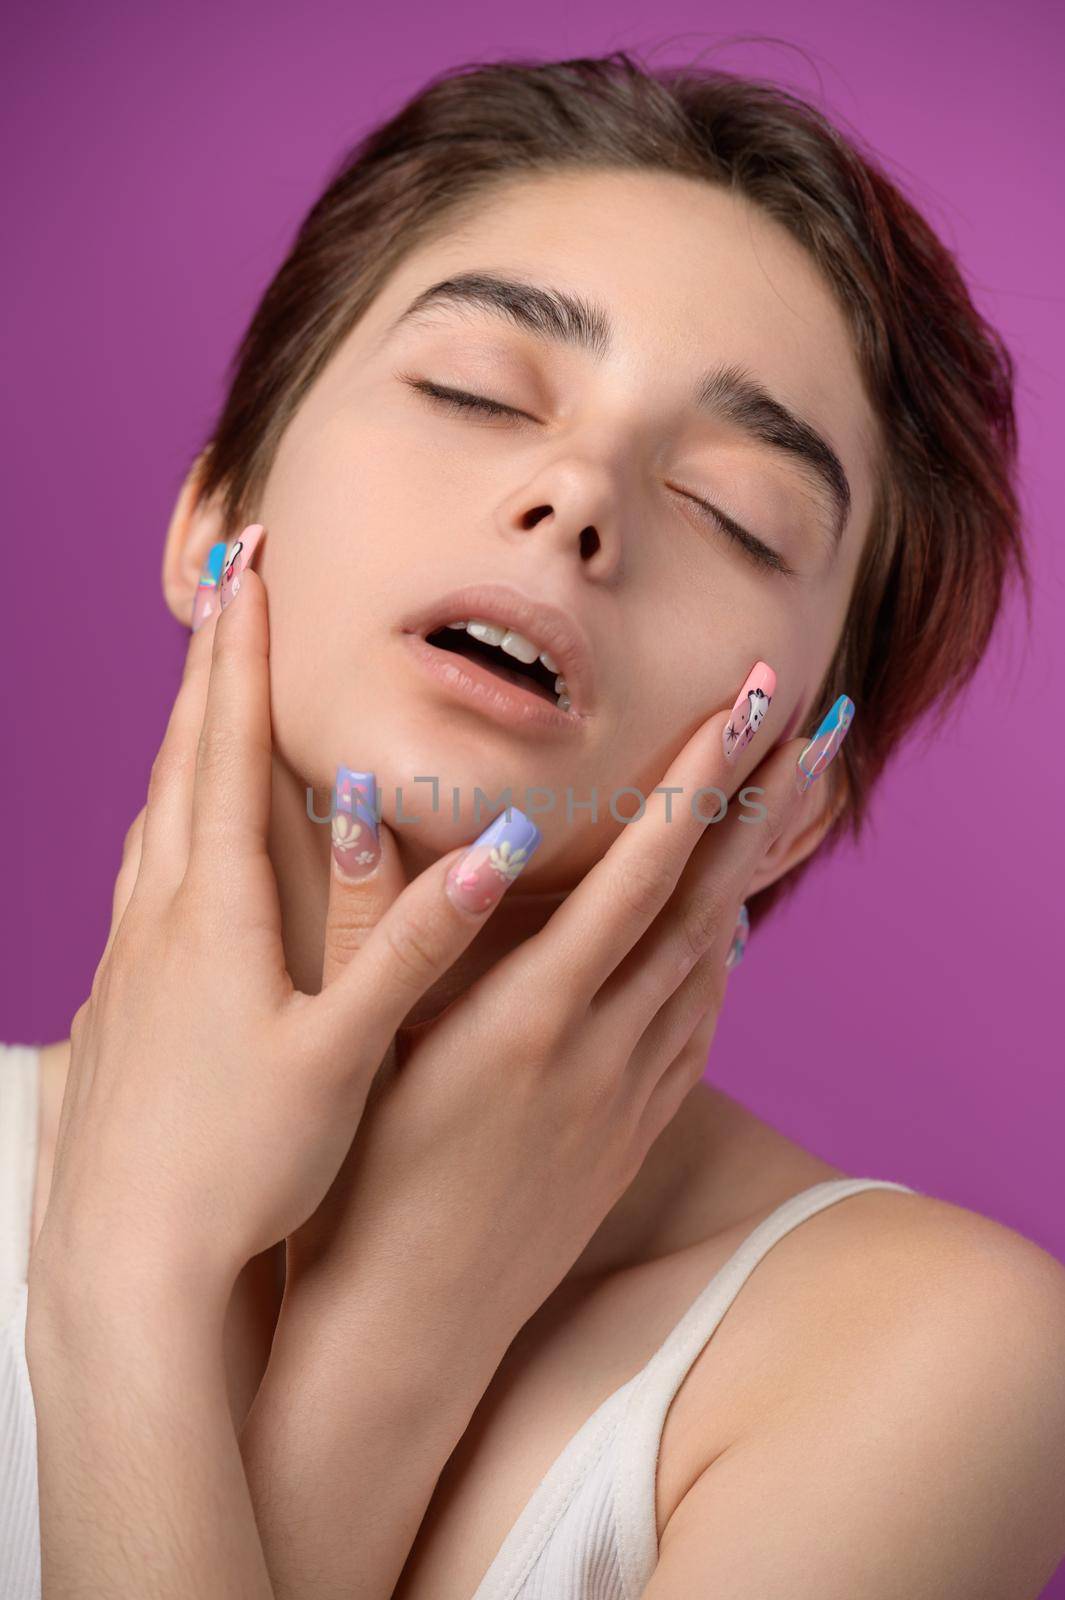 Sensual studio portrait of young pretty girl with palms on her face, short haircut and extravagant nail art, eyes closed, mouth slightly open, colored background